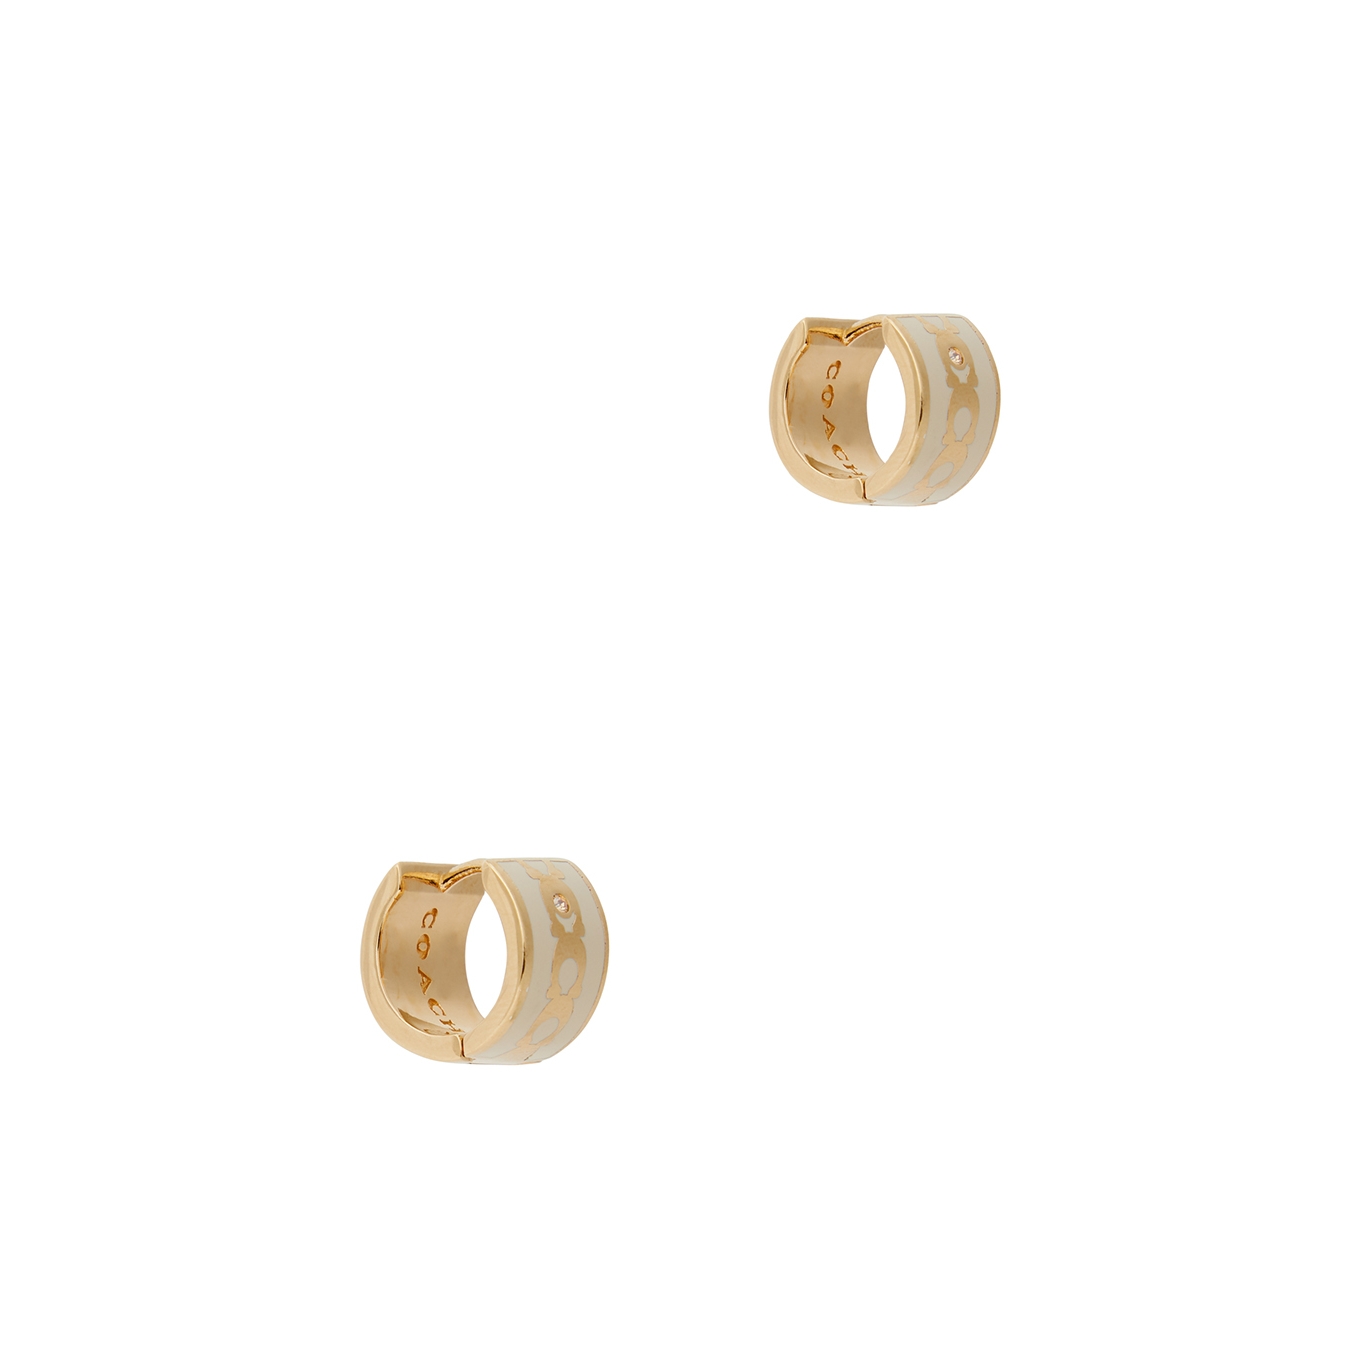 Coach Signature C Hoop Earrings - Gold - One Size